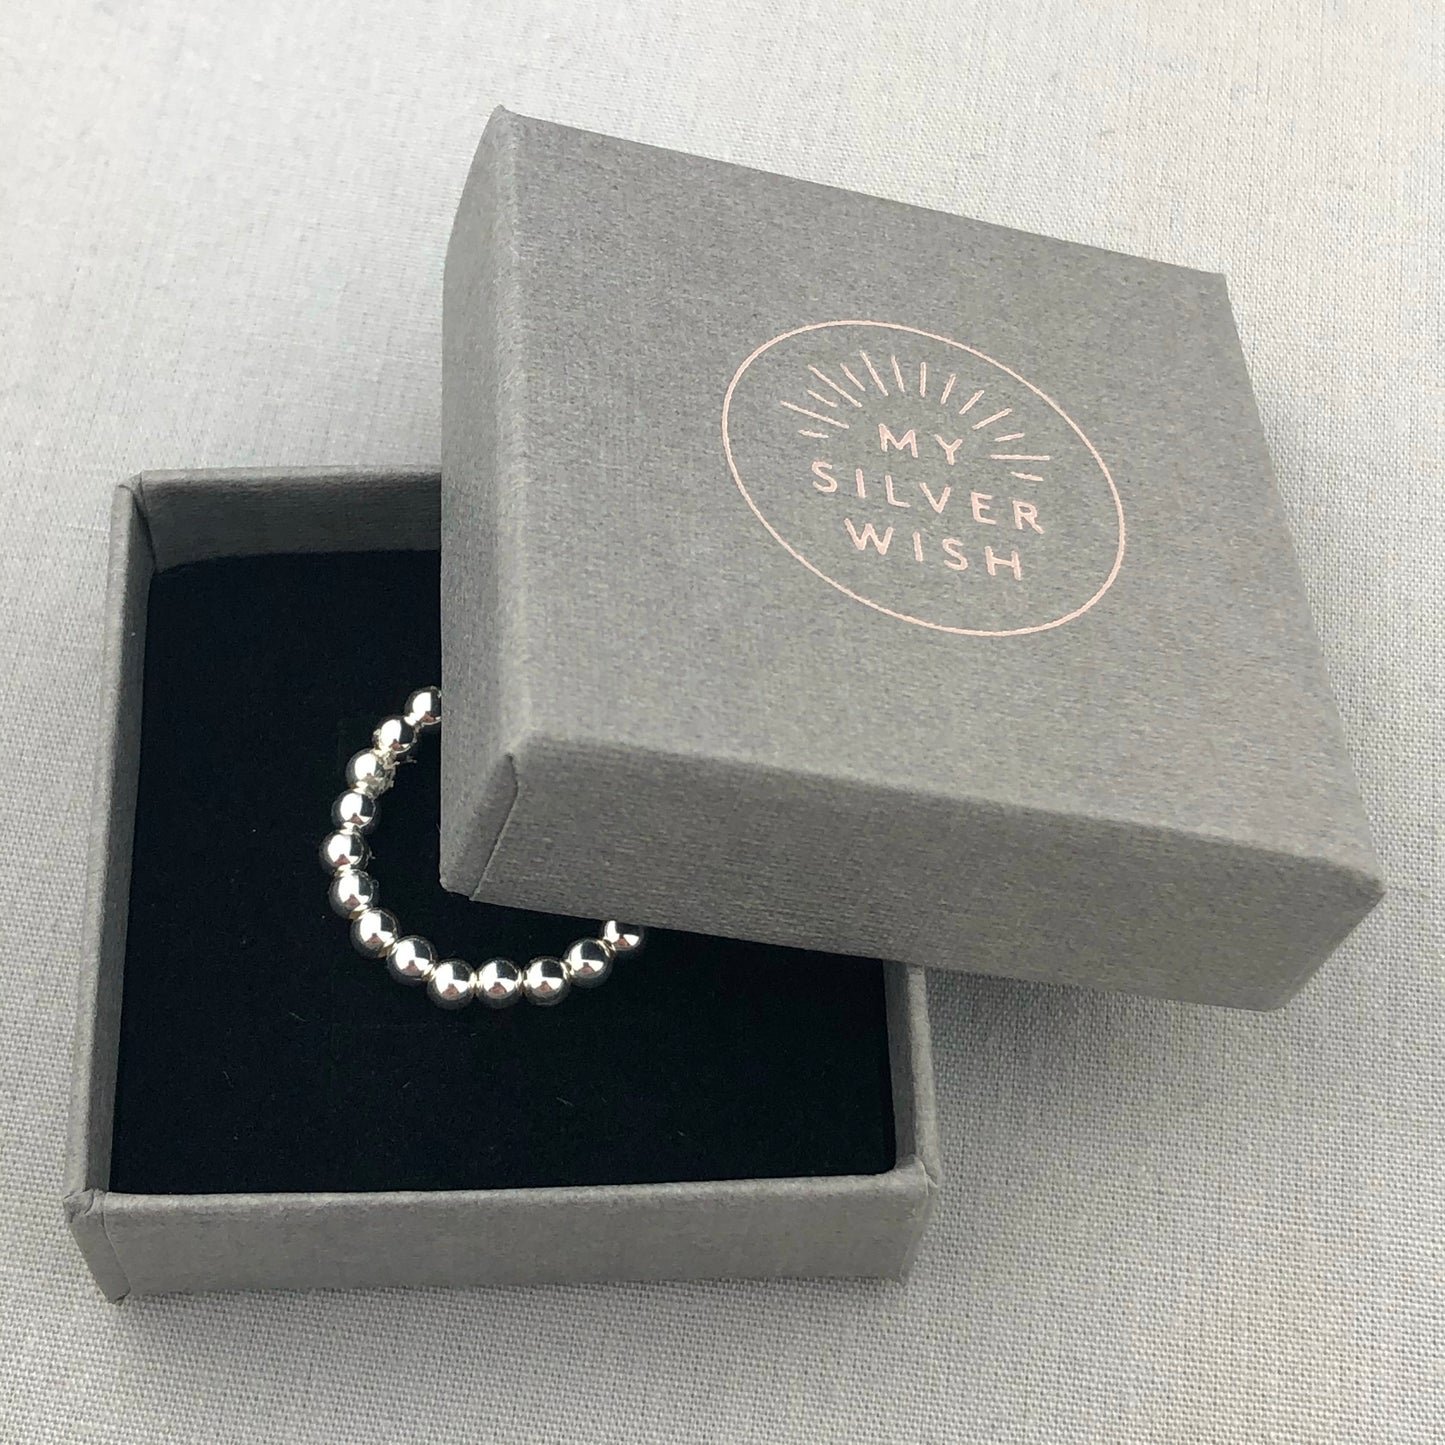 My Silver Wish Gift Box with charm ring inside